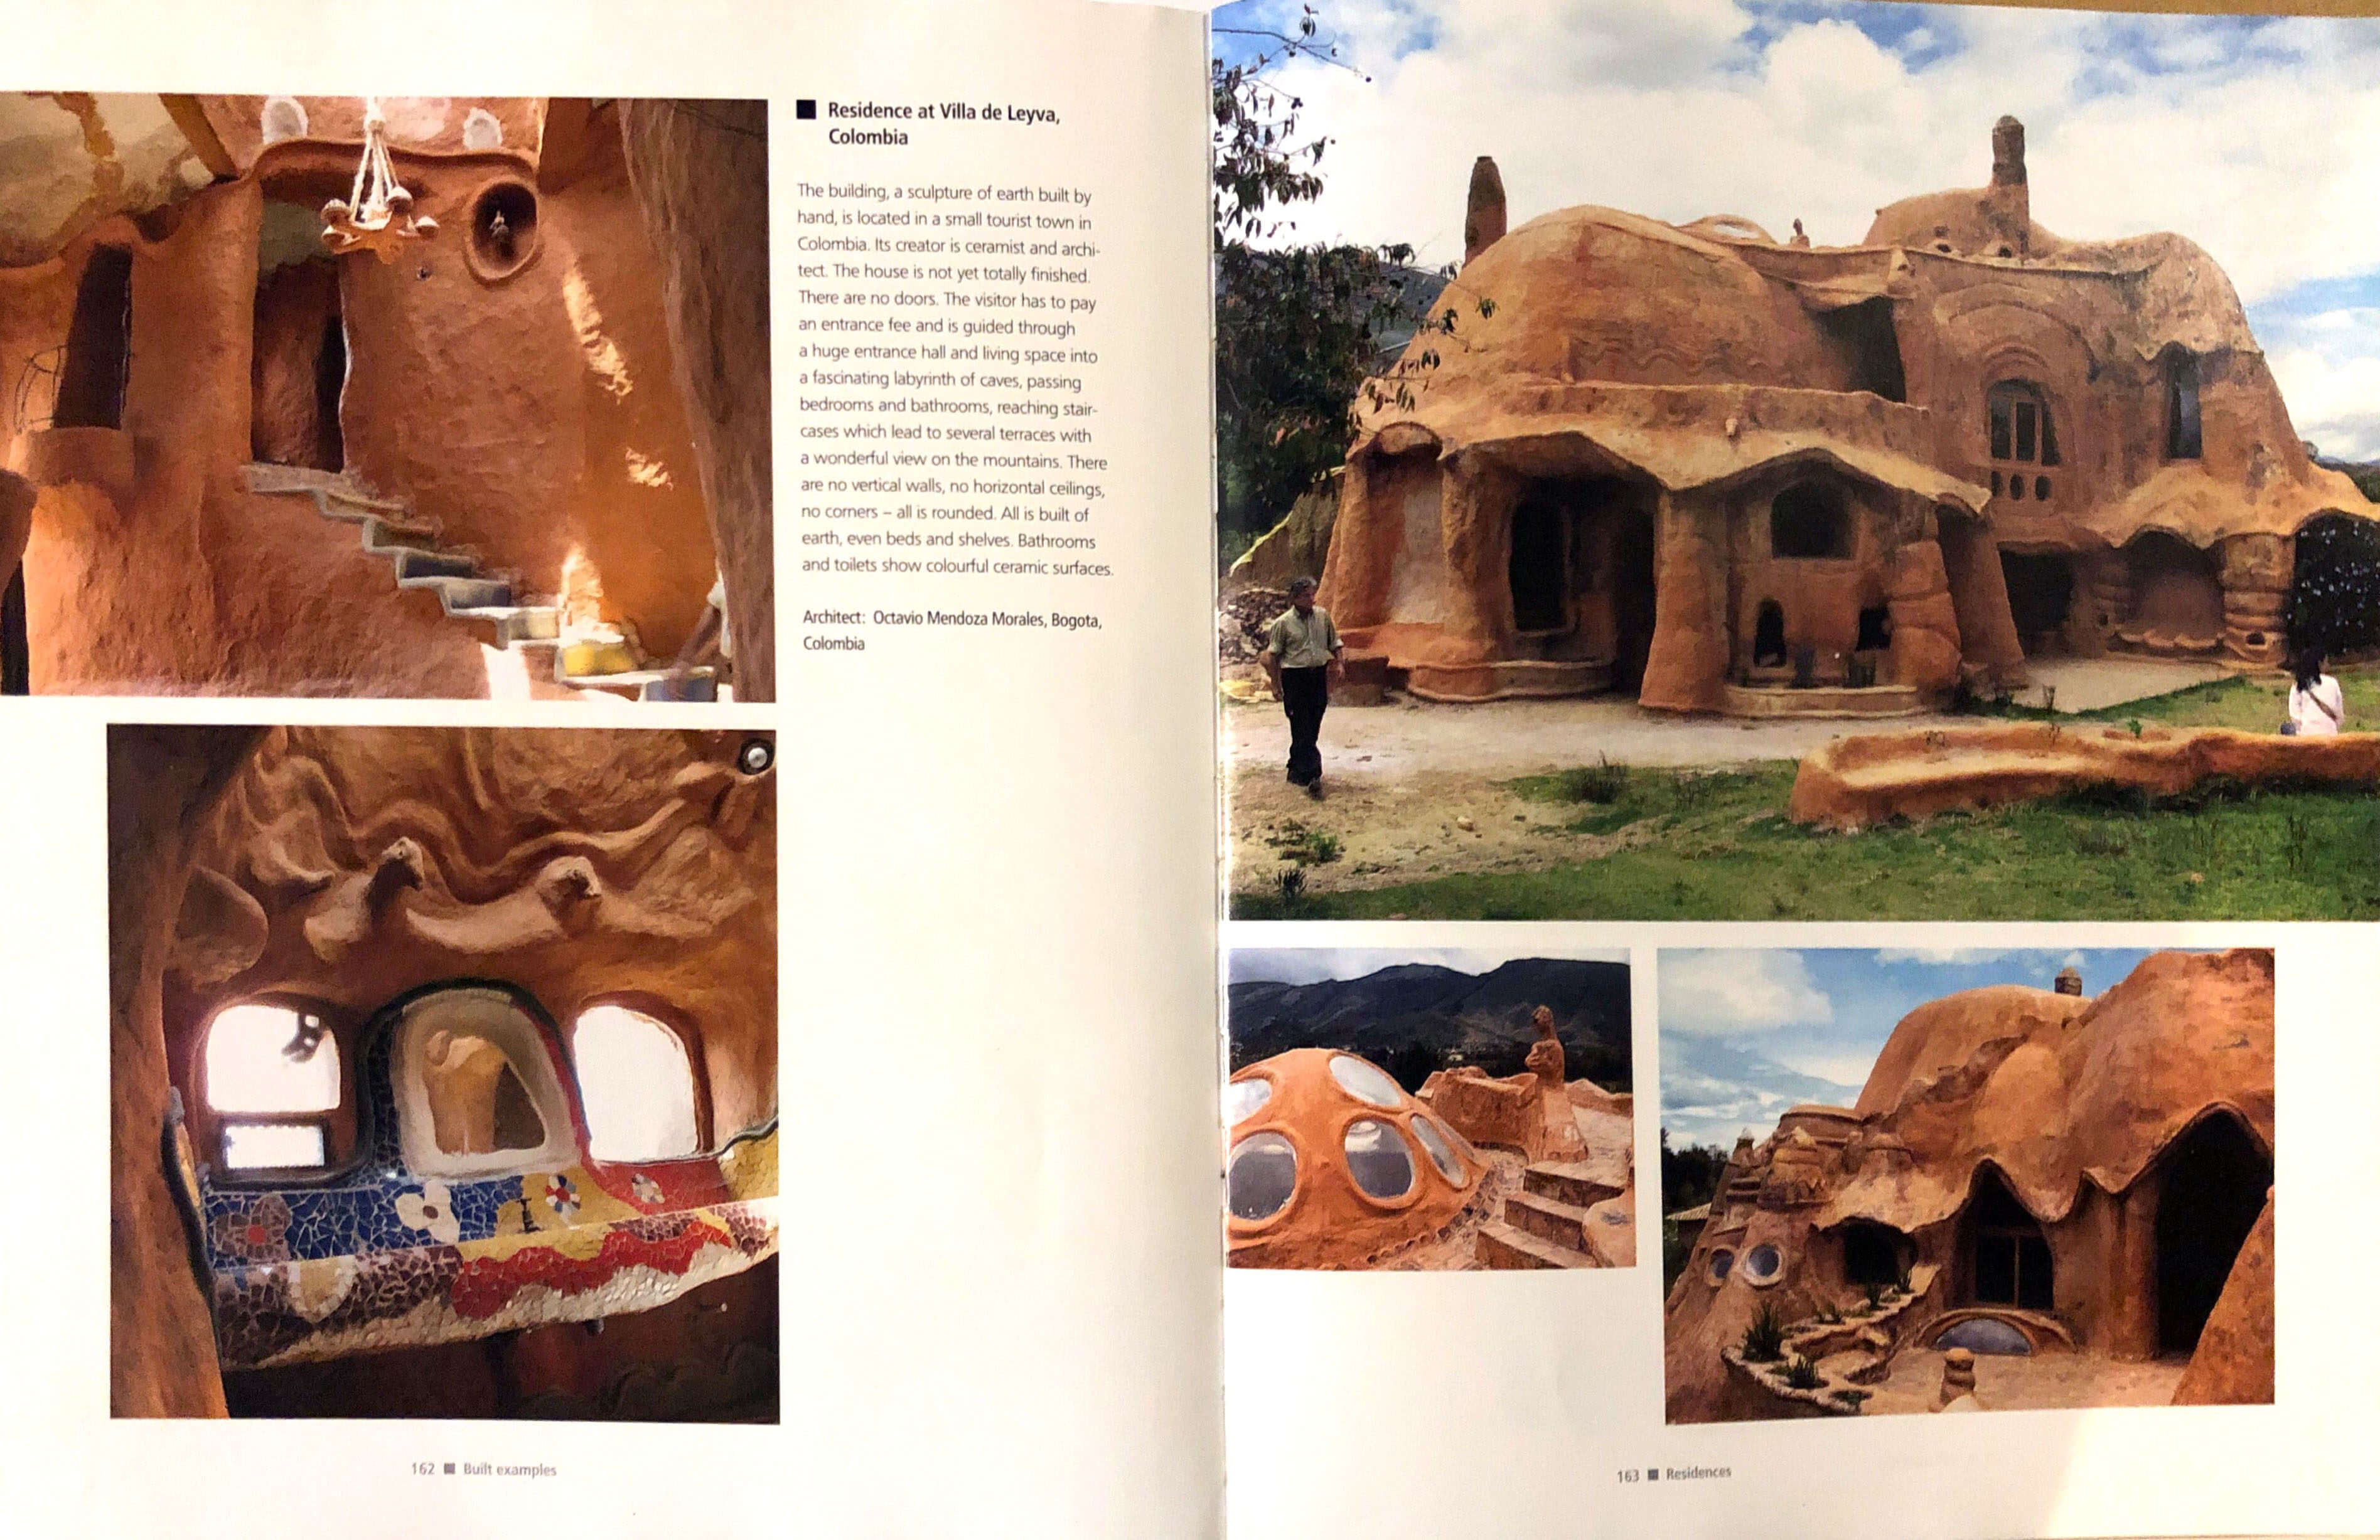 Building with Earth - Casa Terracota